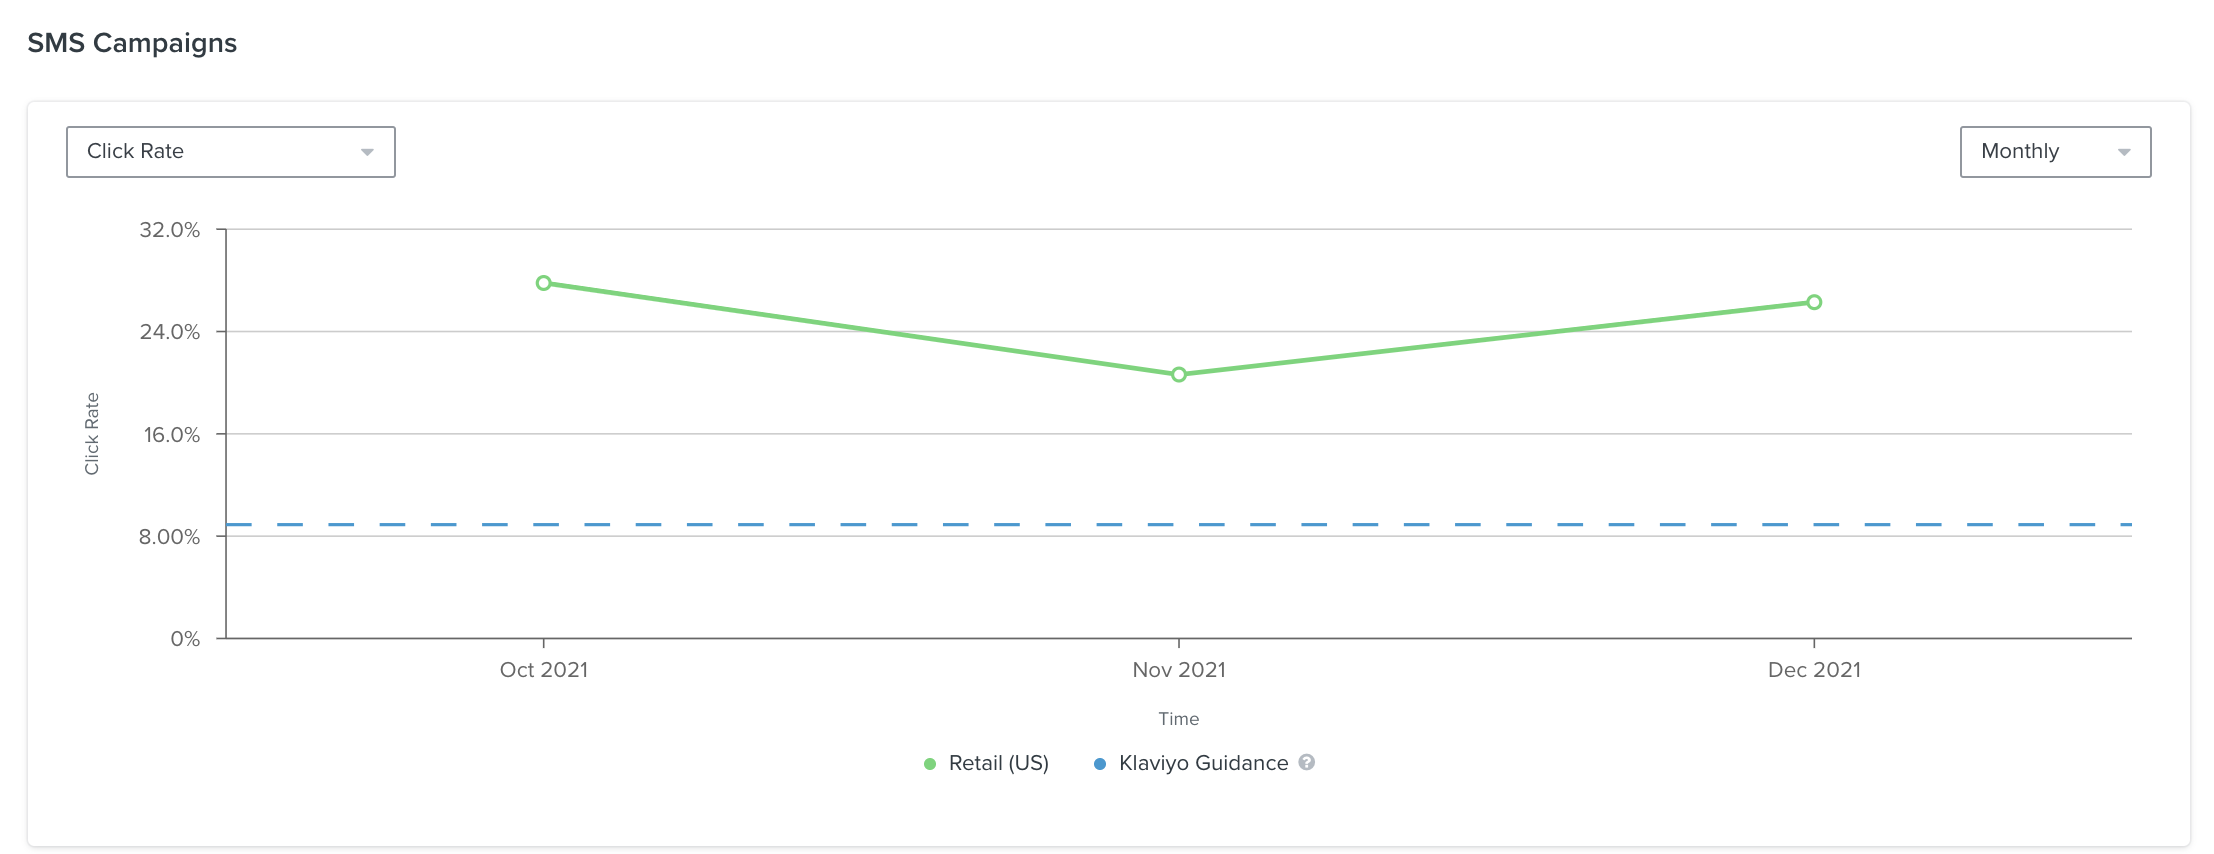 Example of a line chart inside the SMS Campaign Performance page showing click rate data monthly